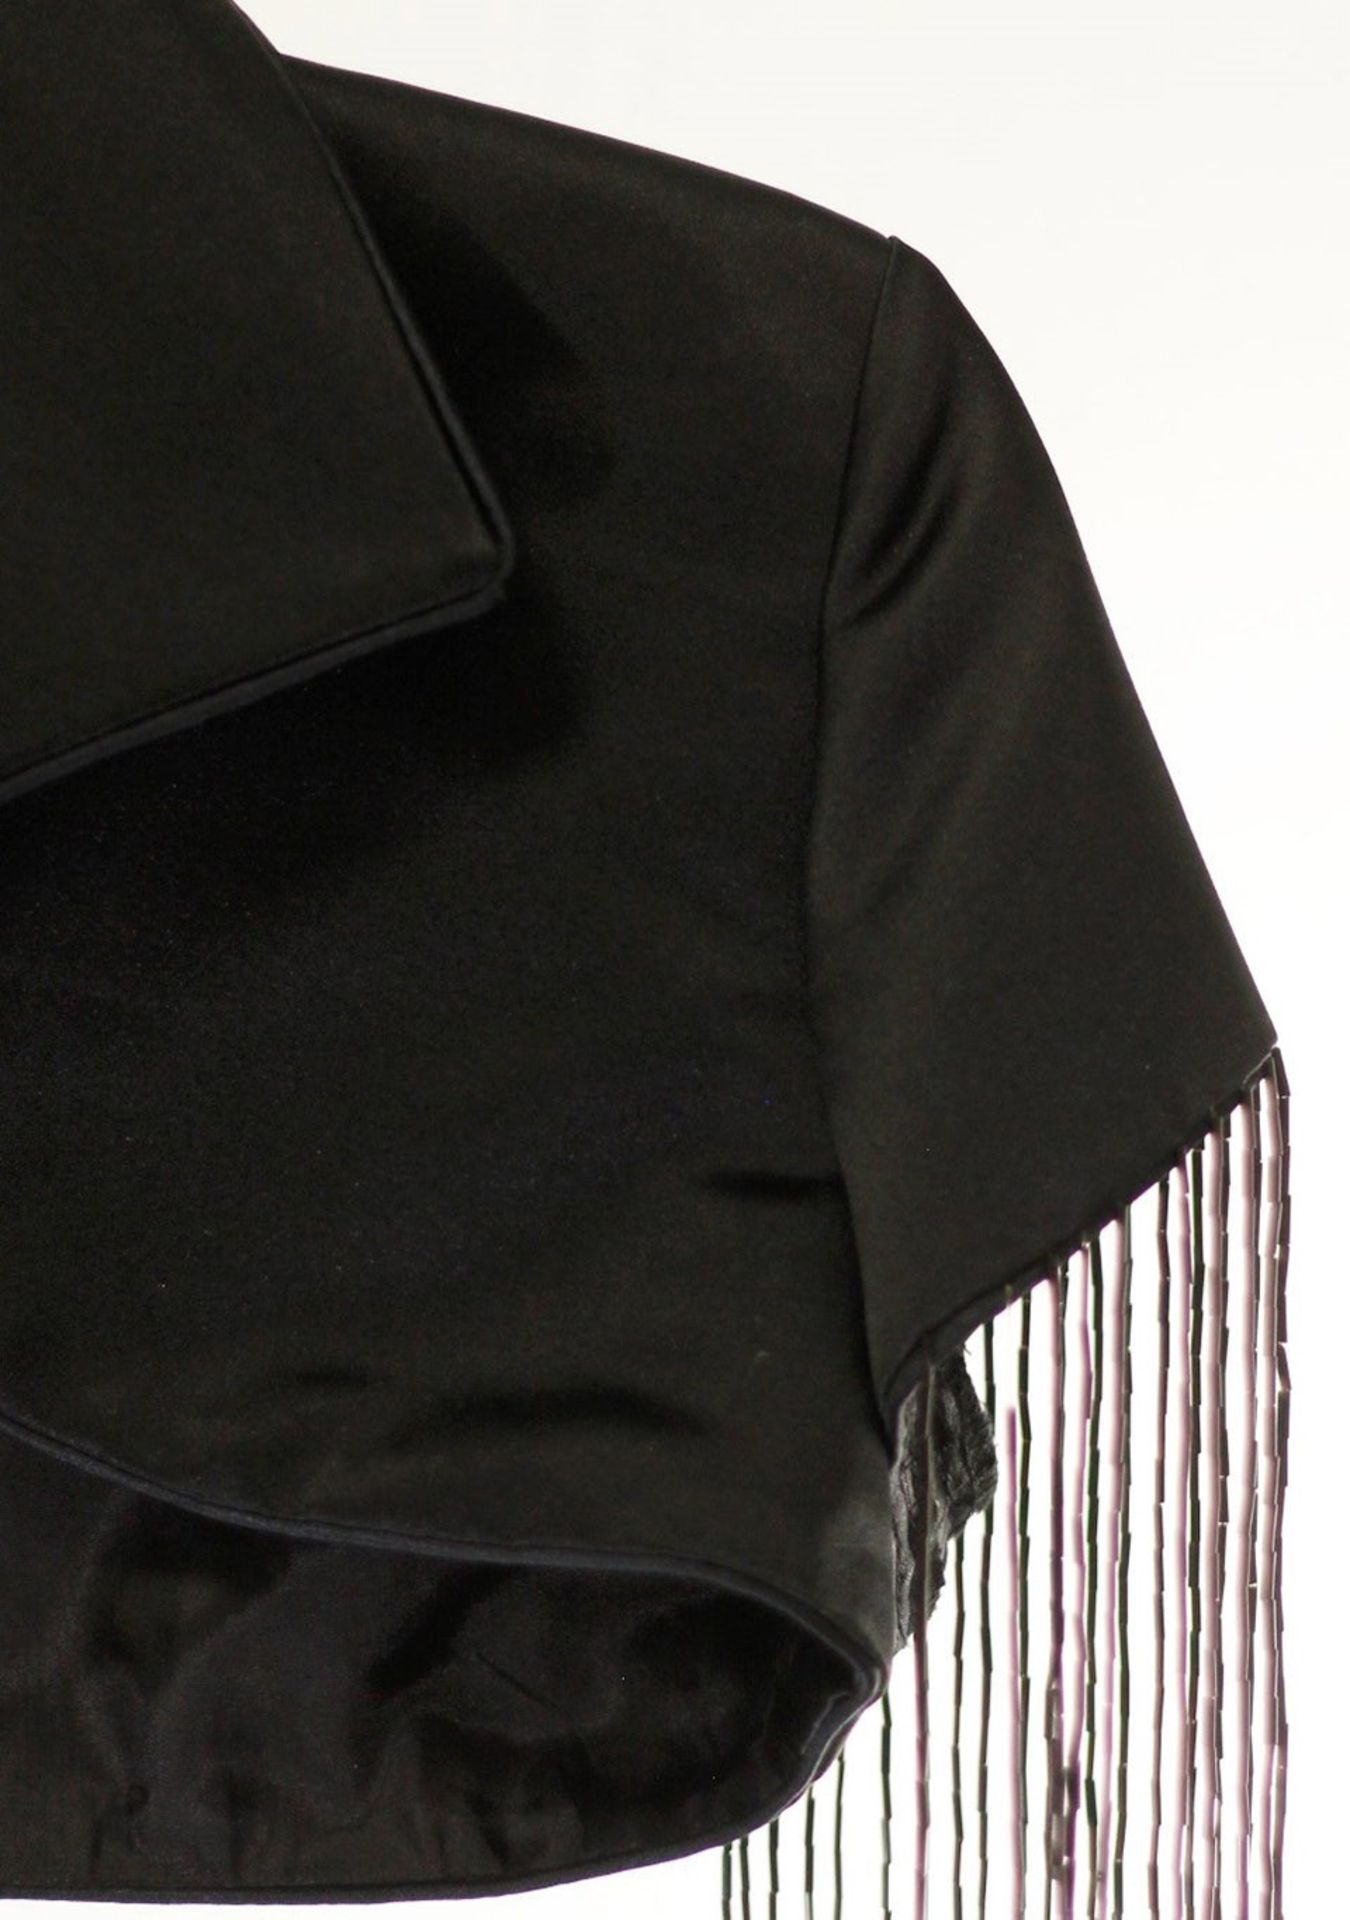 1 x Virginia Atelier Black Bolero - Size: 12 - Material: 50% Nylon, 50% Polyester - From a High - Image 3 of 12